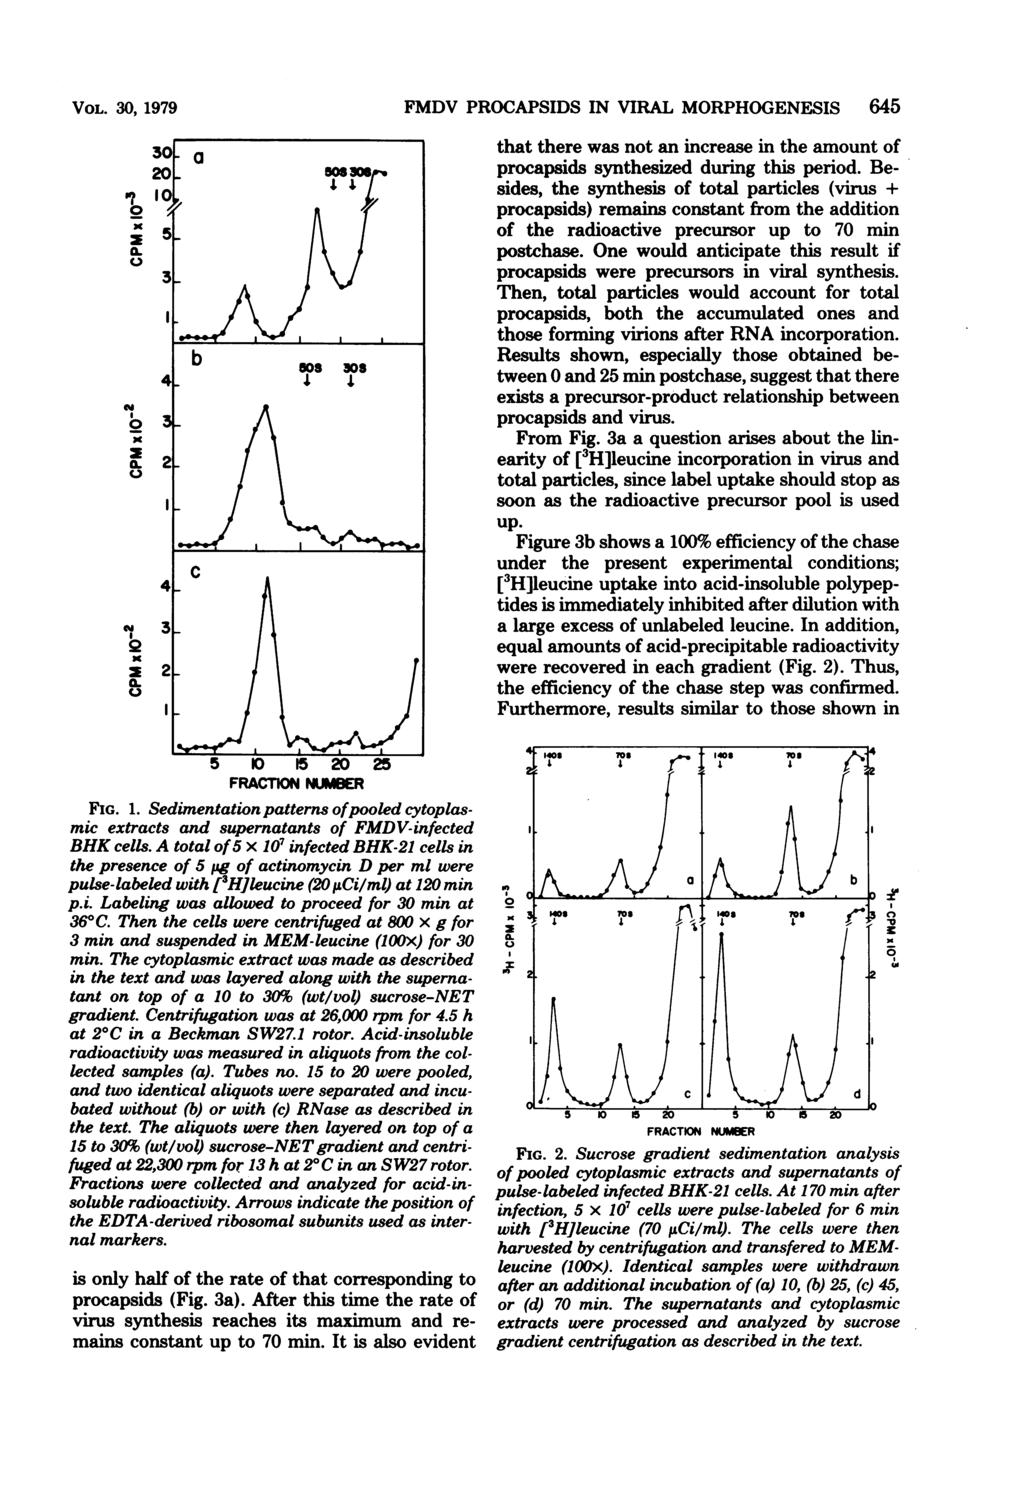 VOL. 3, 1979 l 'I - 3-4- 4- "3 b 58 38. 5 K) 15 2 25 FRACTON NUMBER FIG. 1. Sedimentation patterns ofpooled cytoplasmic extracts and supernatants of FMDV-infected BHK cells.